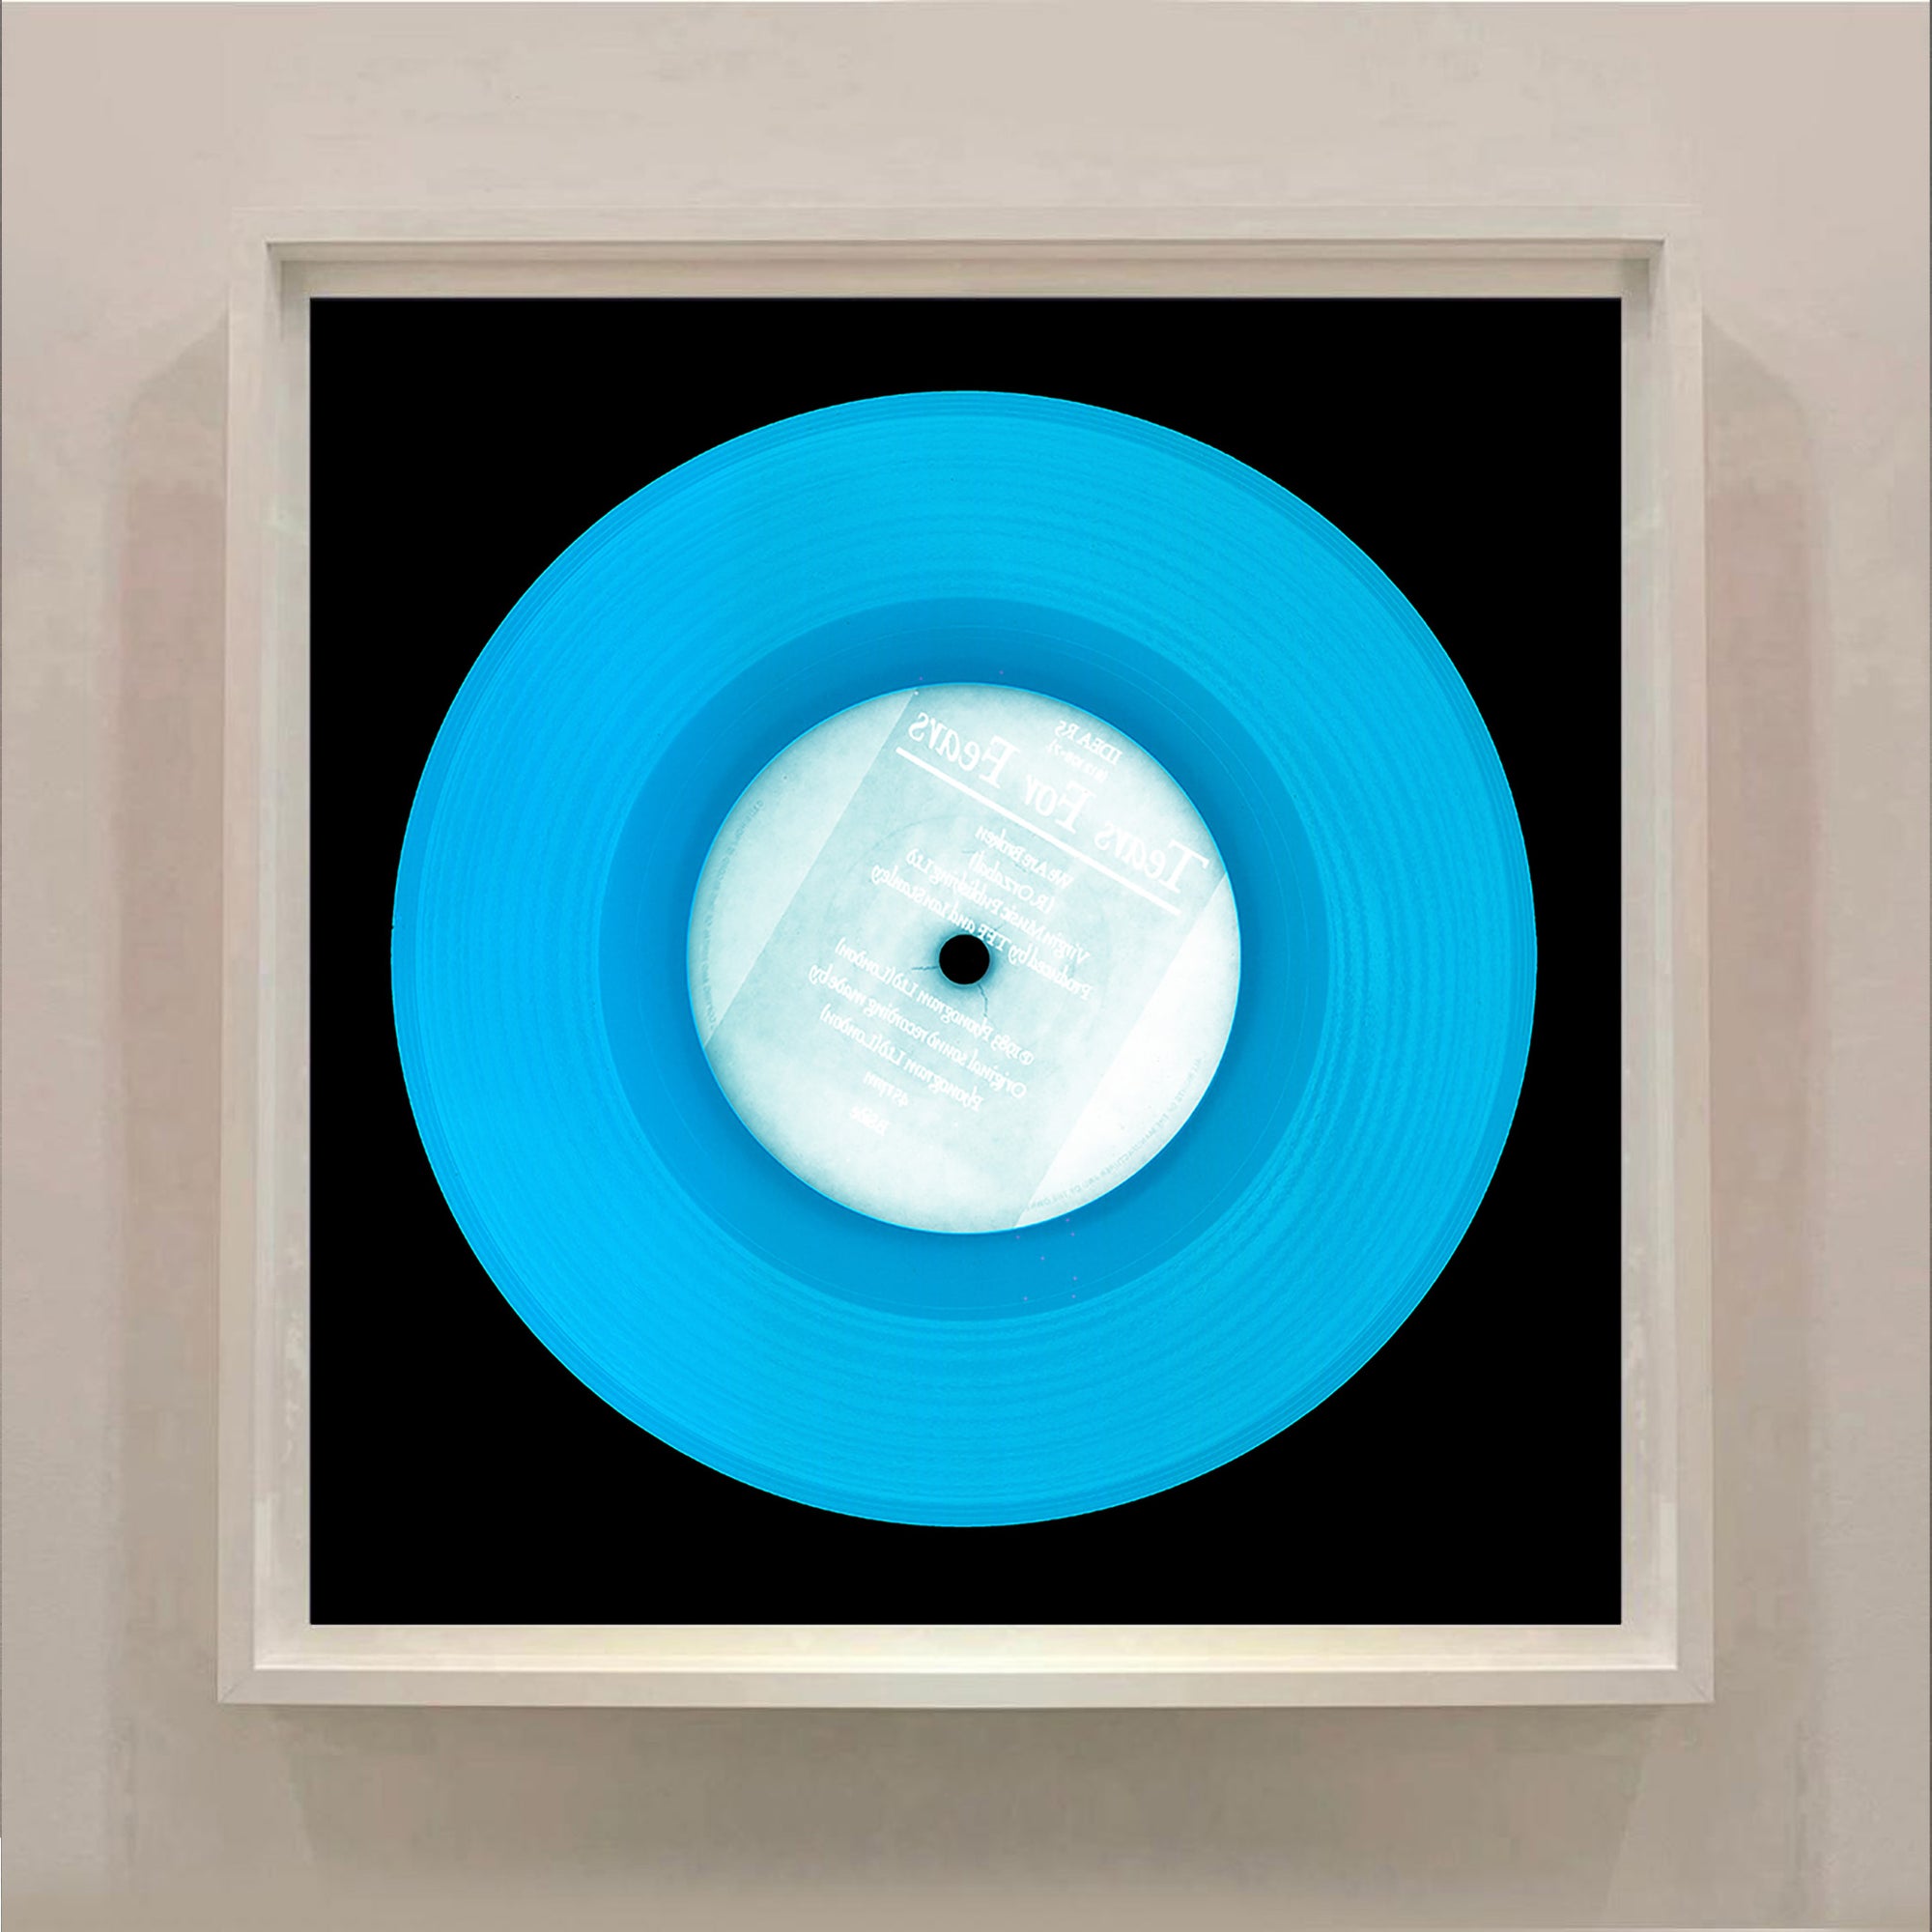 Vinyl Collection 'Idea' (Cyan), 2014. Acclaimed contemporary photographers, Richard Heeps and Natasha Heidler have collaborated to make this beautifully mesmerising collection. A celebration of the vinyl record and analogue technology, which reflects the artists practice within photography.